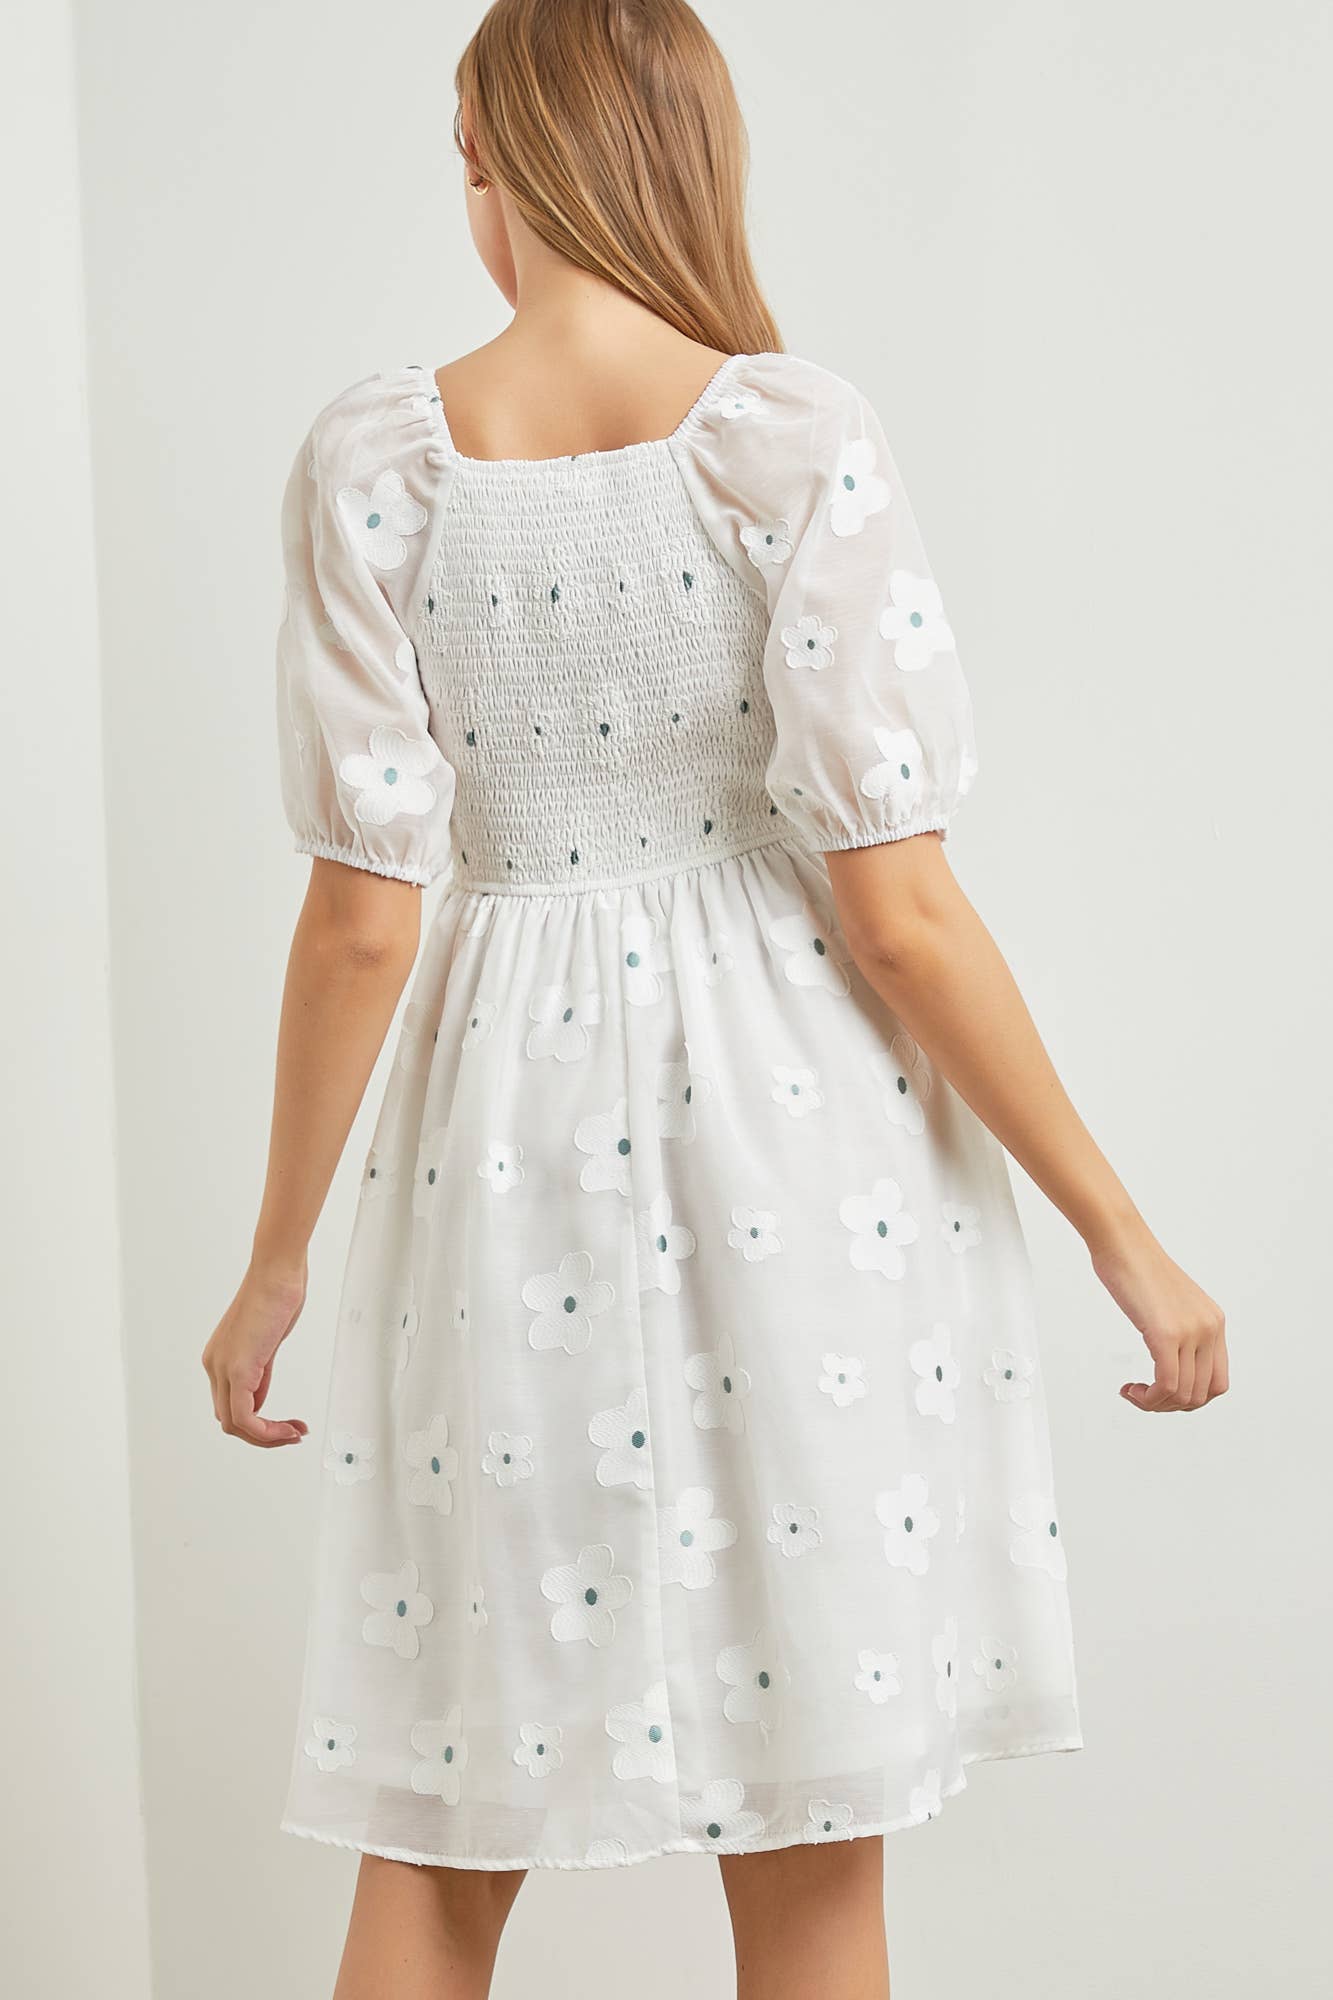 SQUARE MIDI DRESS WITH DAISY FLORAL PRINT DETAIL - Out of the Blue